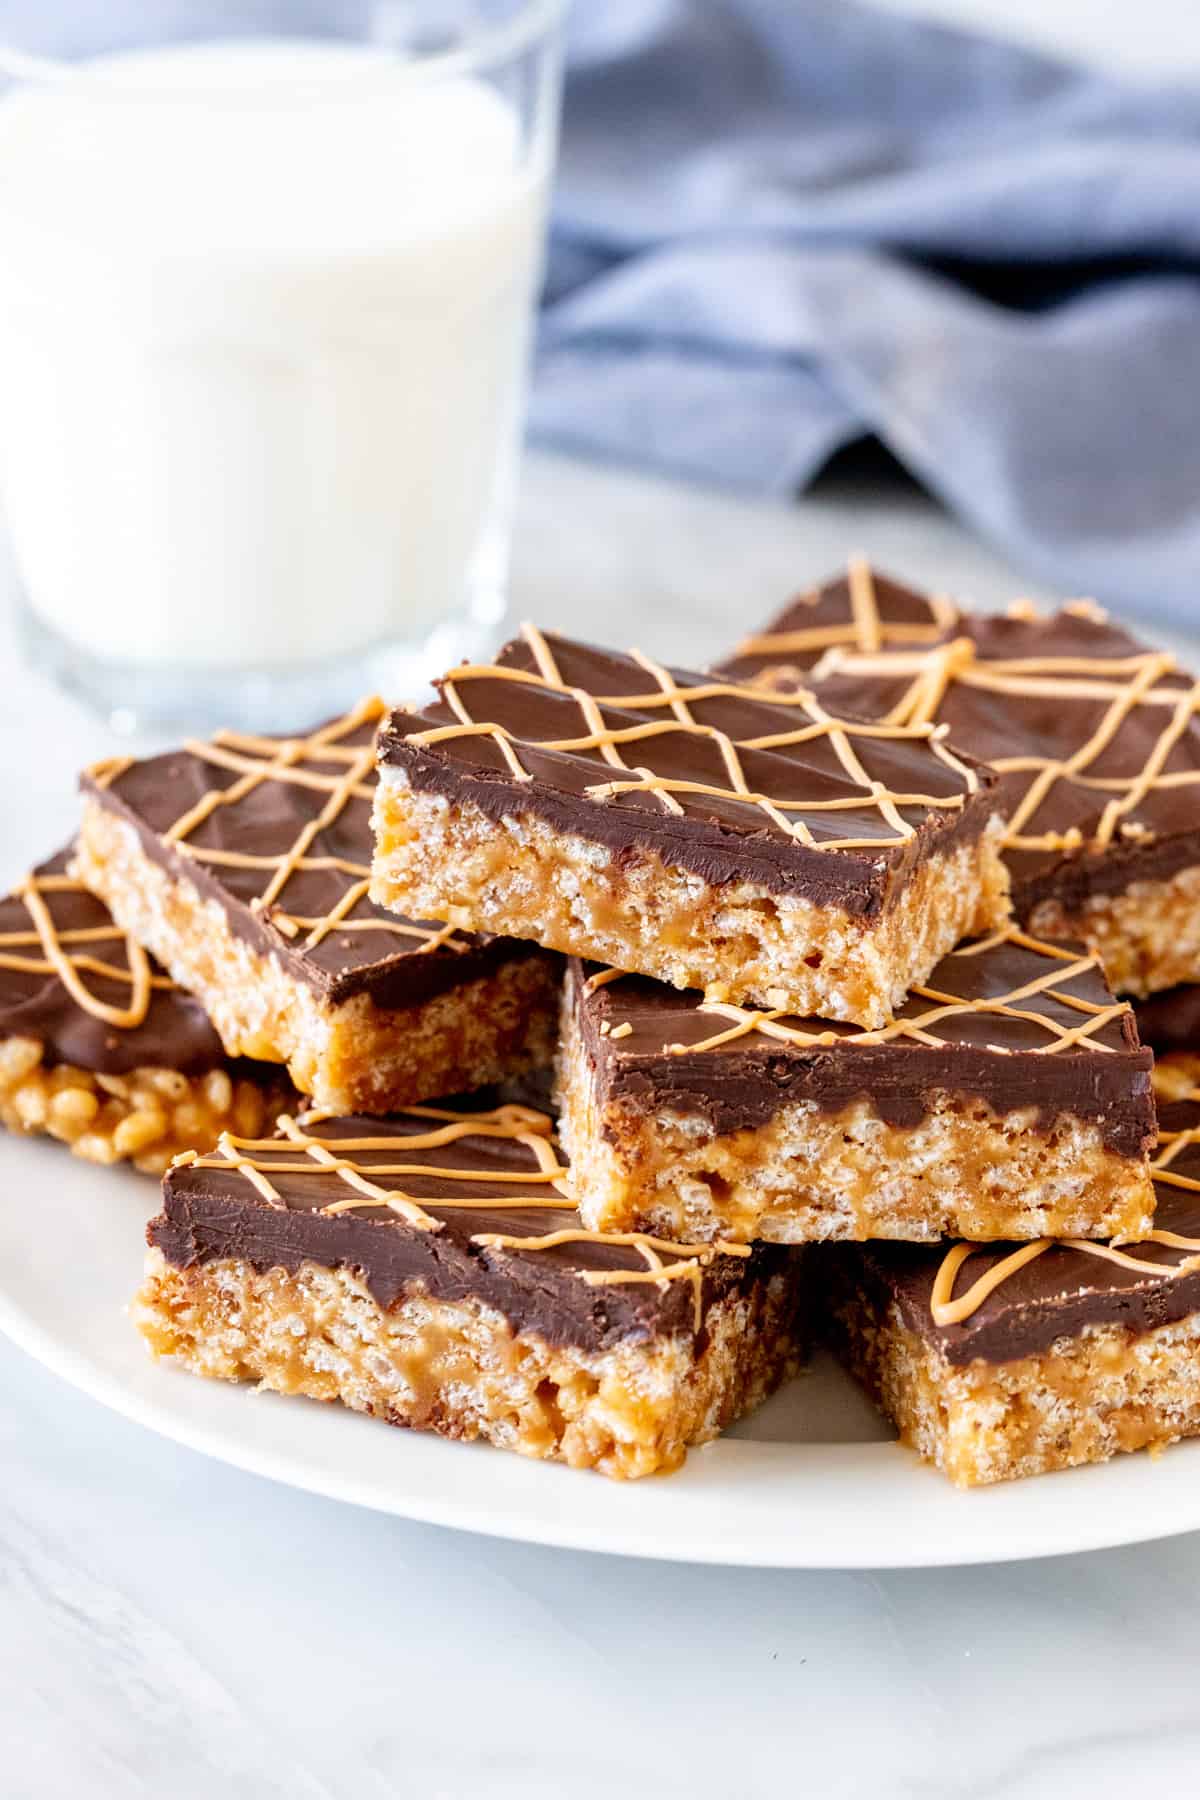 Plate of butterscotch Rice Krispie treats with chocolate on top